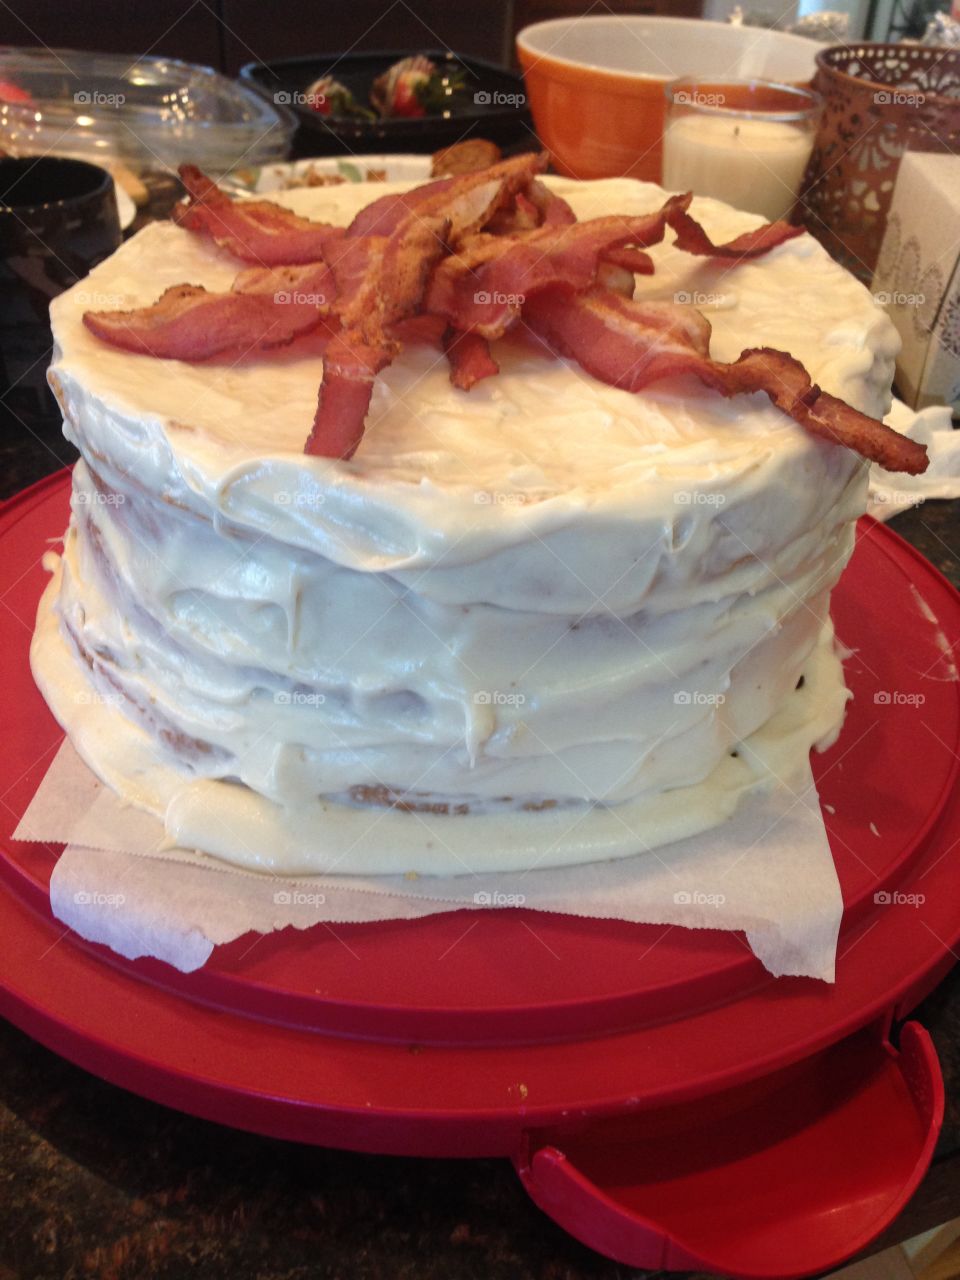 Bacon cake . Yes that's a bacon cake. Maple flavored caked. Sweet buttercream frosting and bacon. 